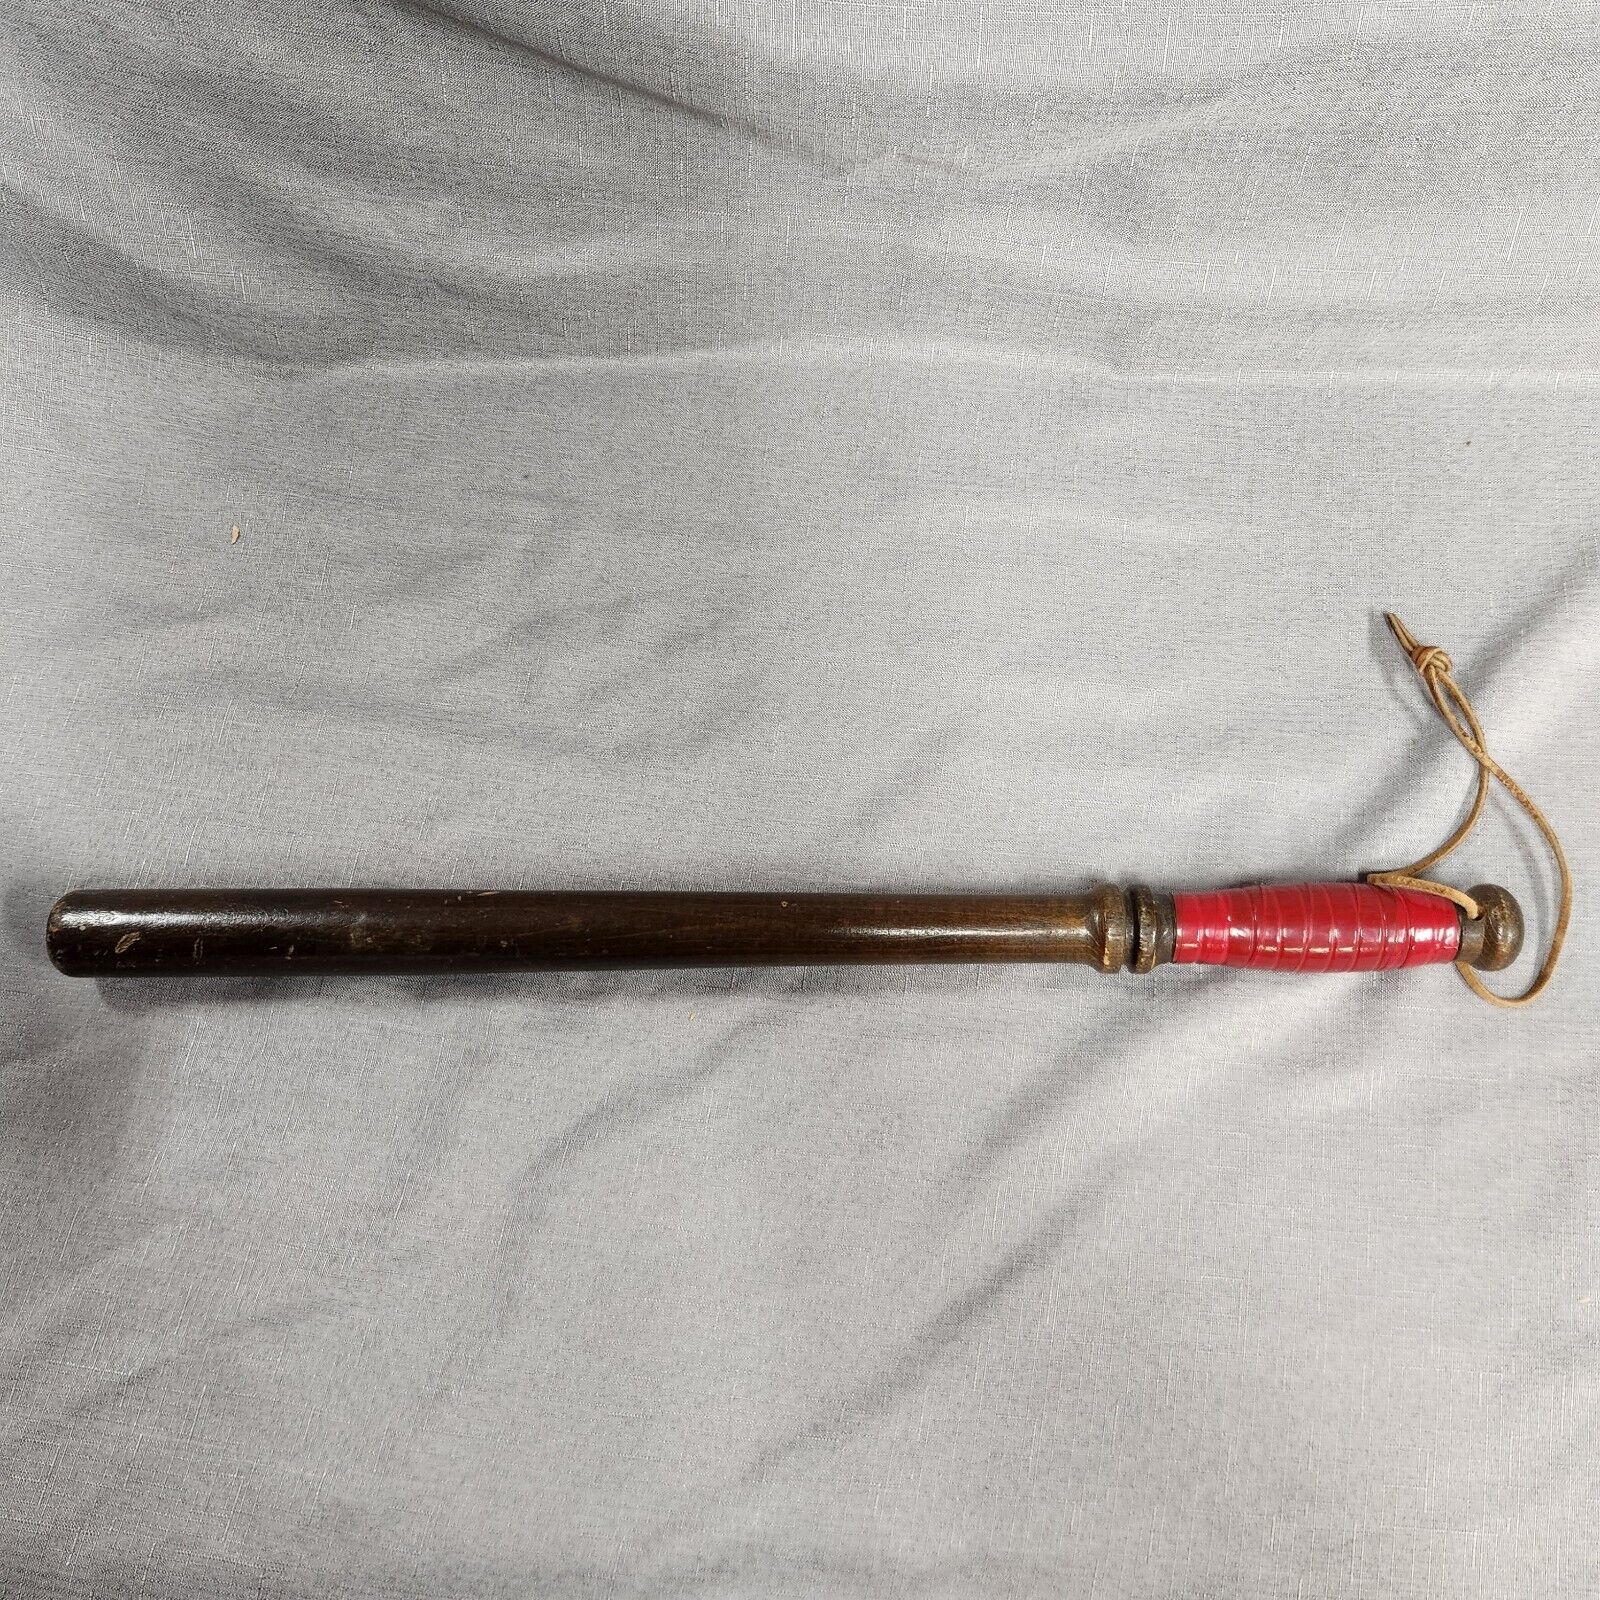 Vintage Wooden Police Baton 22in